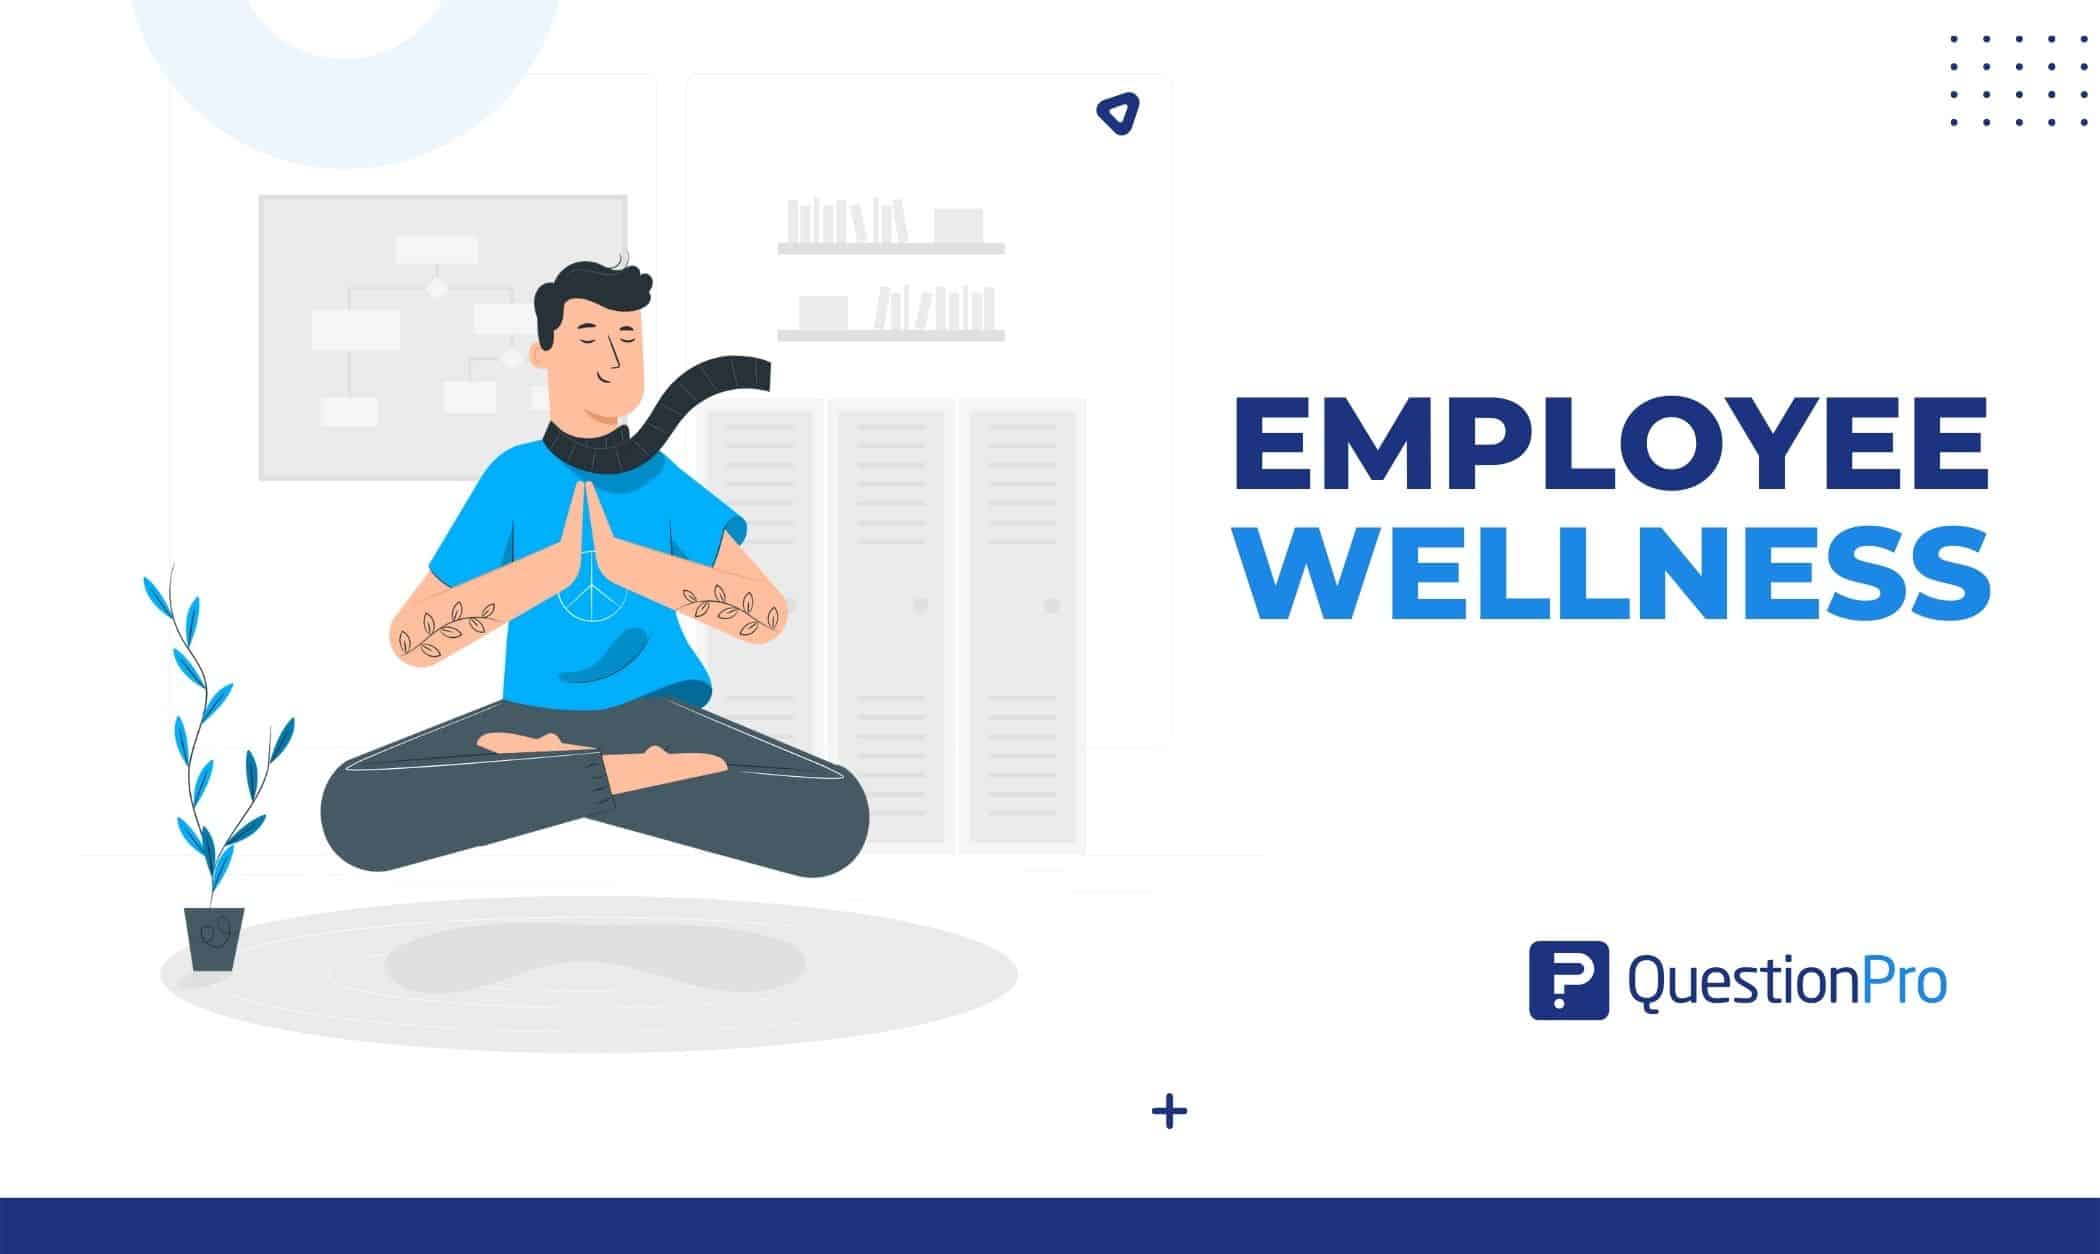 The Benefits of Office Yoga and Meditation Practices for Employees